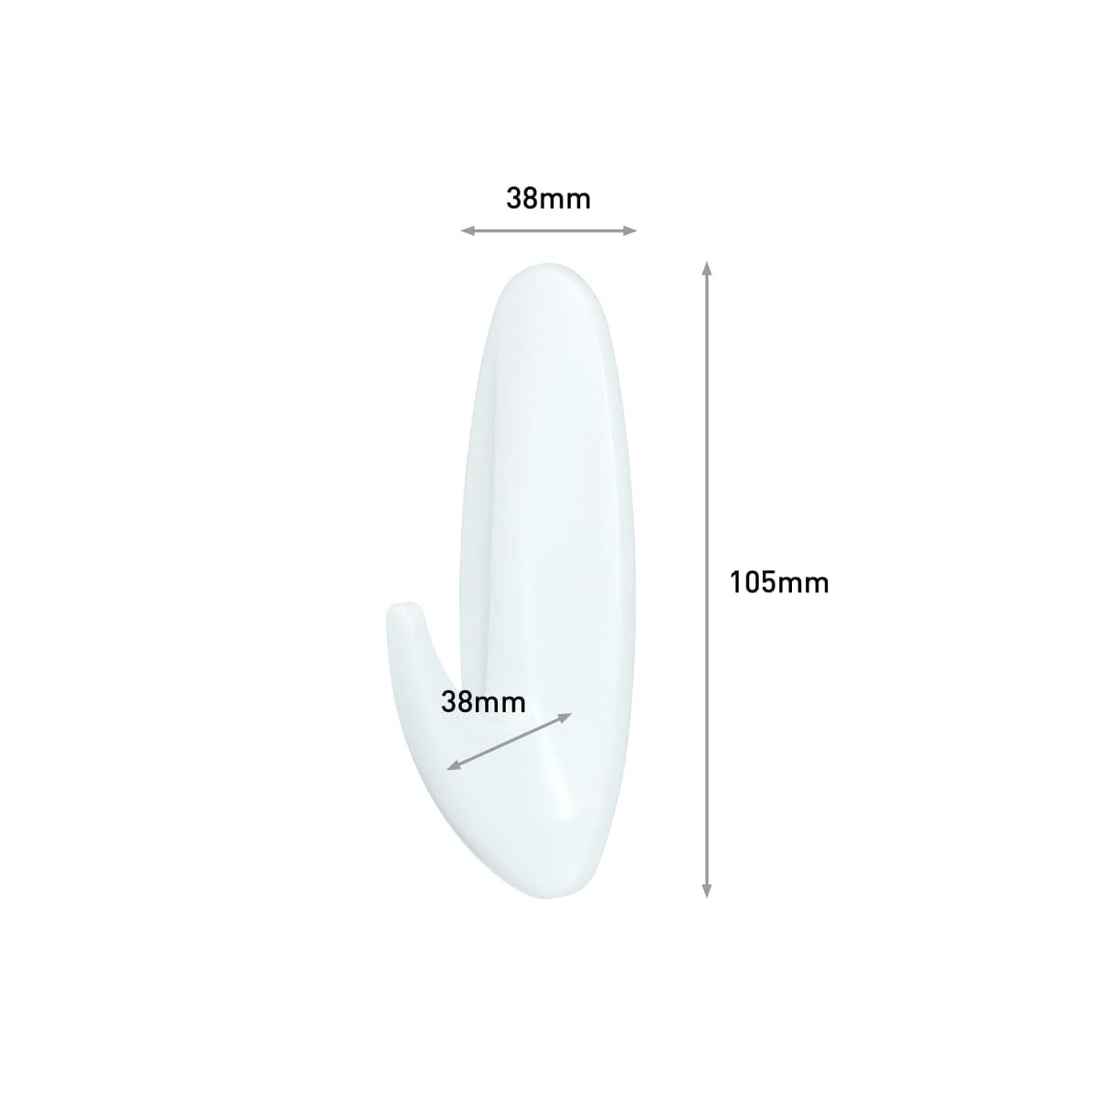 OVAL WHITE ADHESIVE HOOK FOR COMMAND BATHROOM LARGE 2.3 KG - best price from Maltashopper.com BR410007419